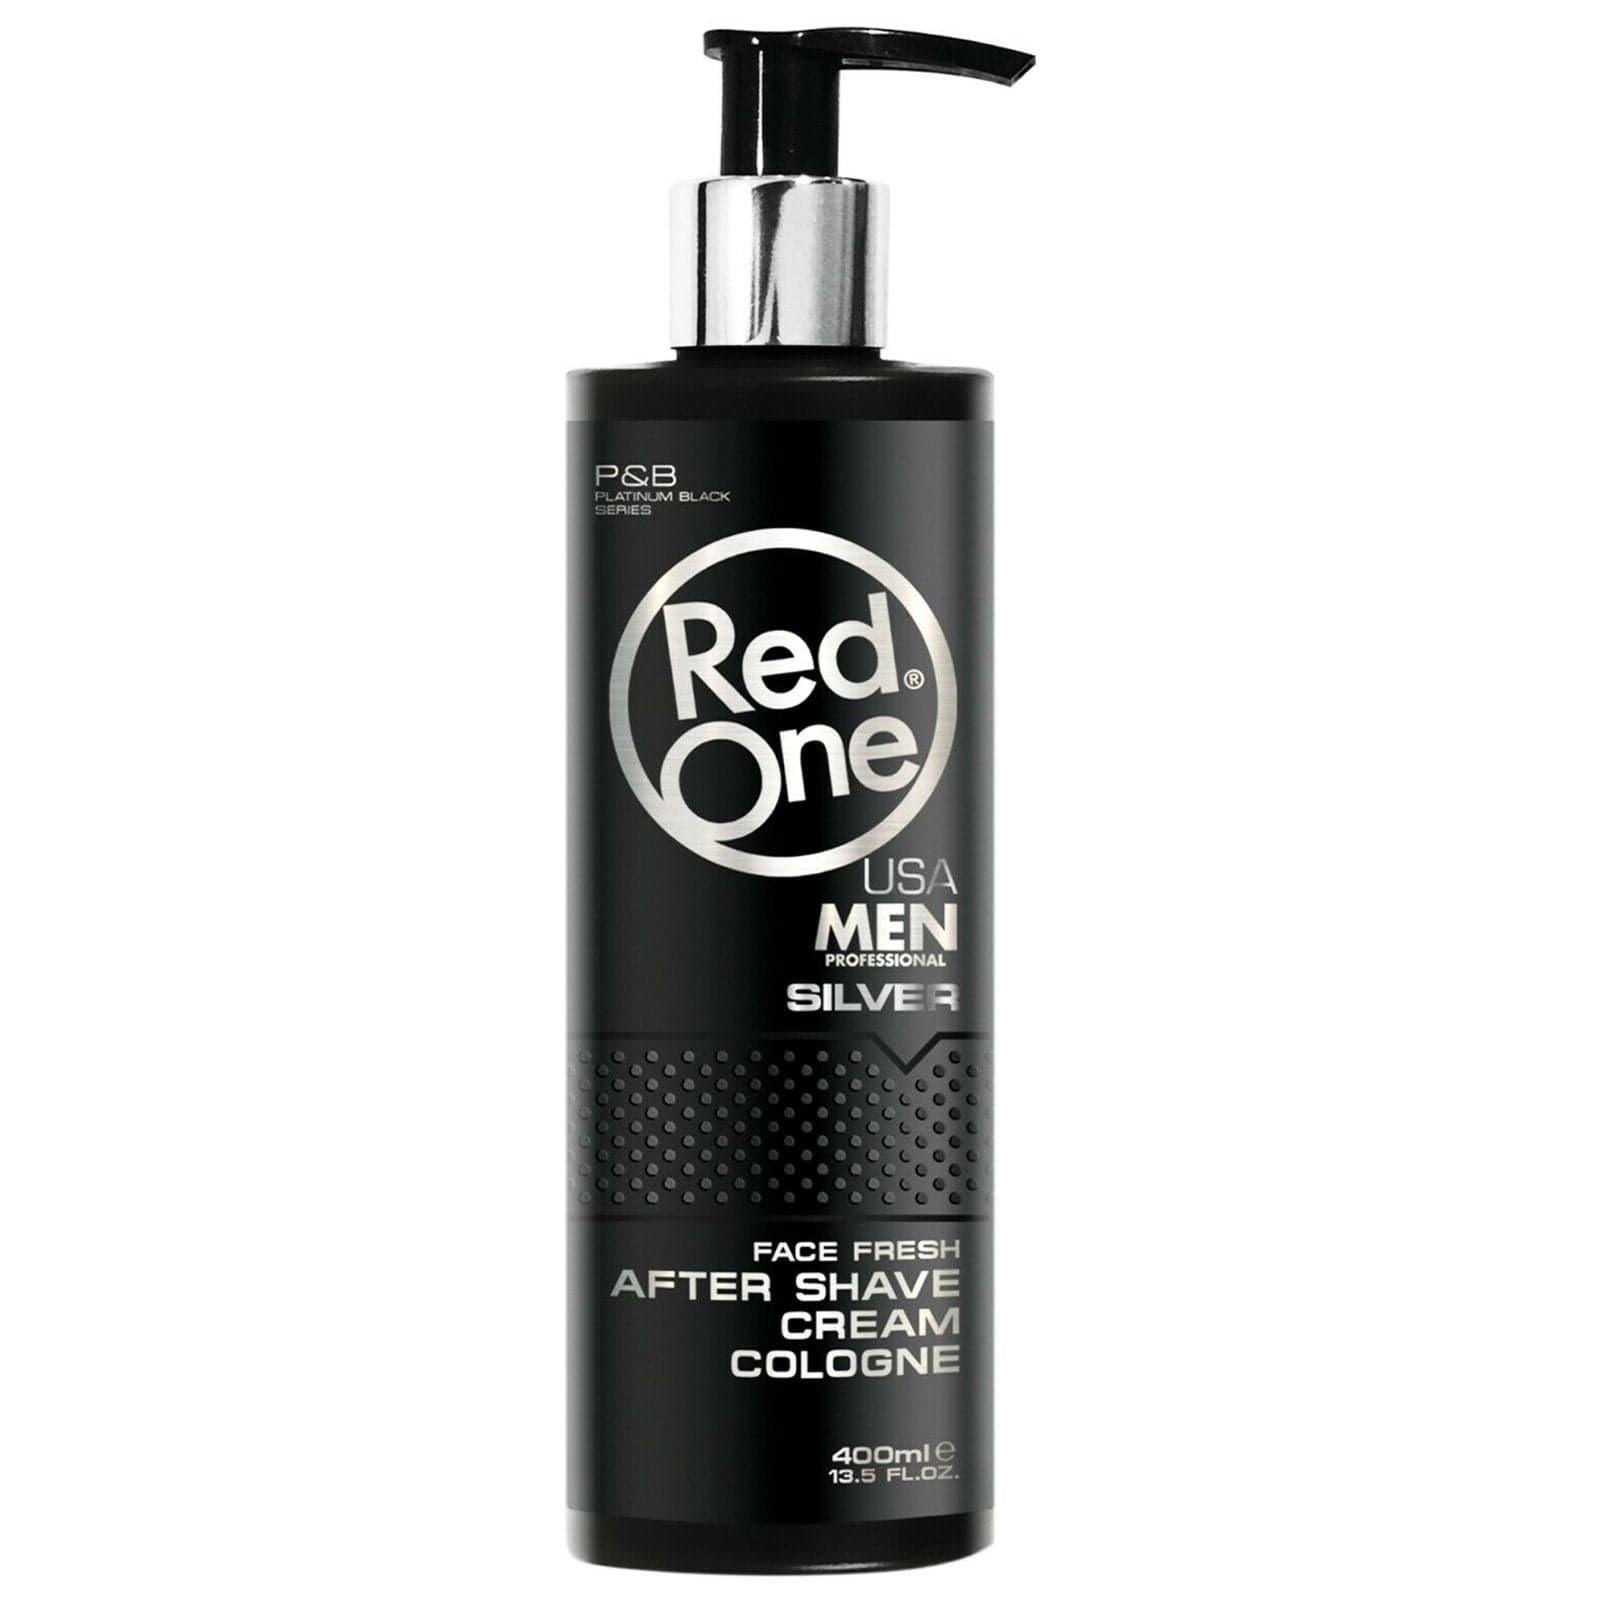 RedOne After Shave Cream Cologne Silver 400ml